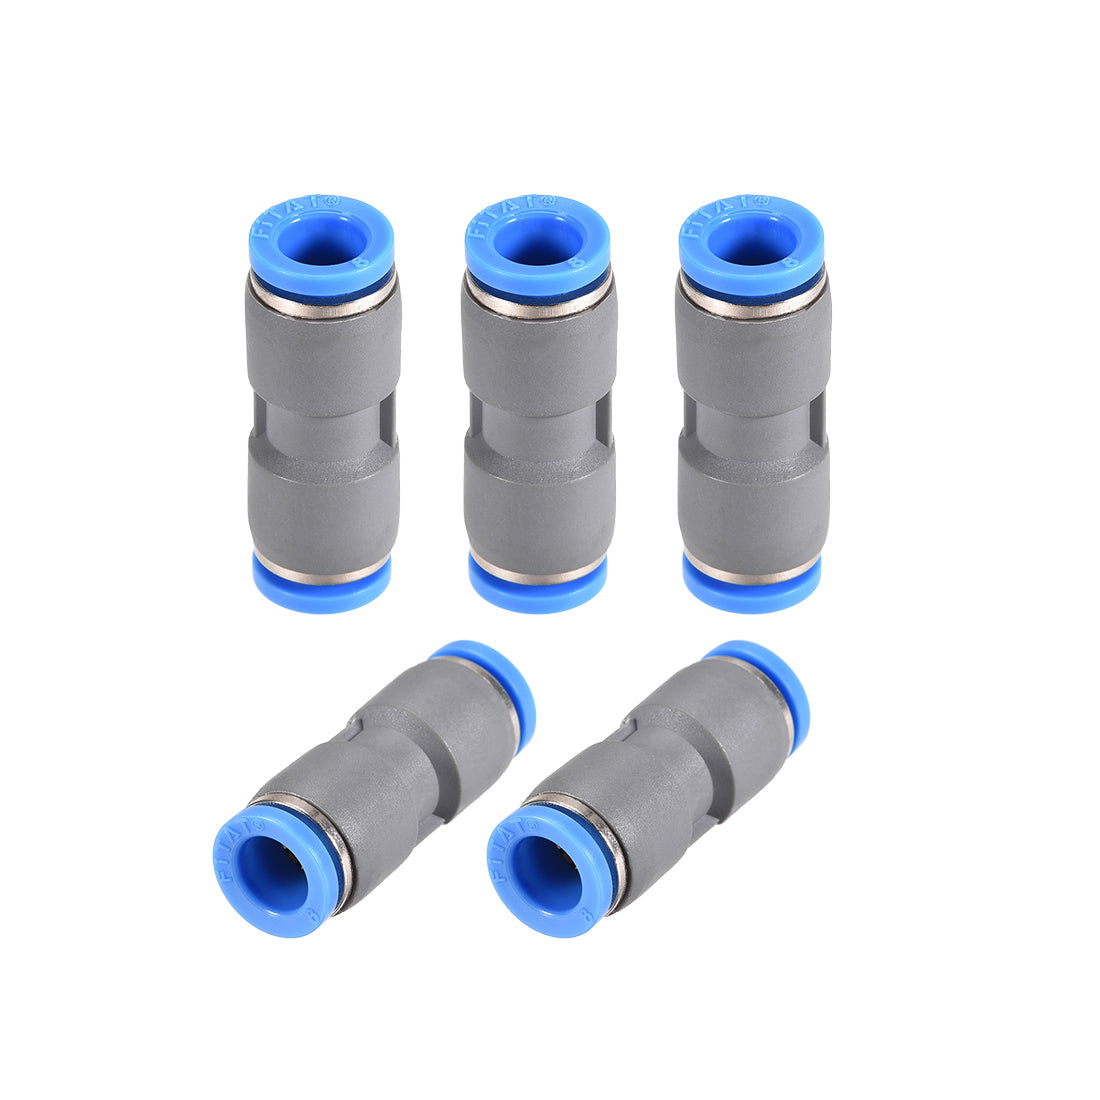 uxcell Uxcell Straight Push Connectors 8mm Quick Release Pneumatic Connector Plastic Union Pipe Tube Fitting Grey 5Pcs